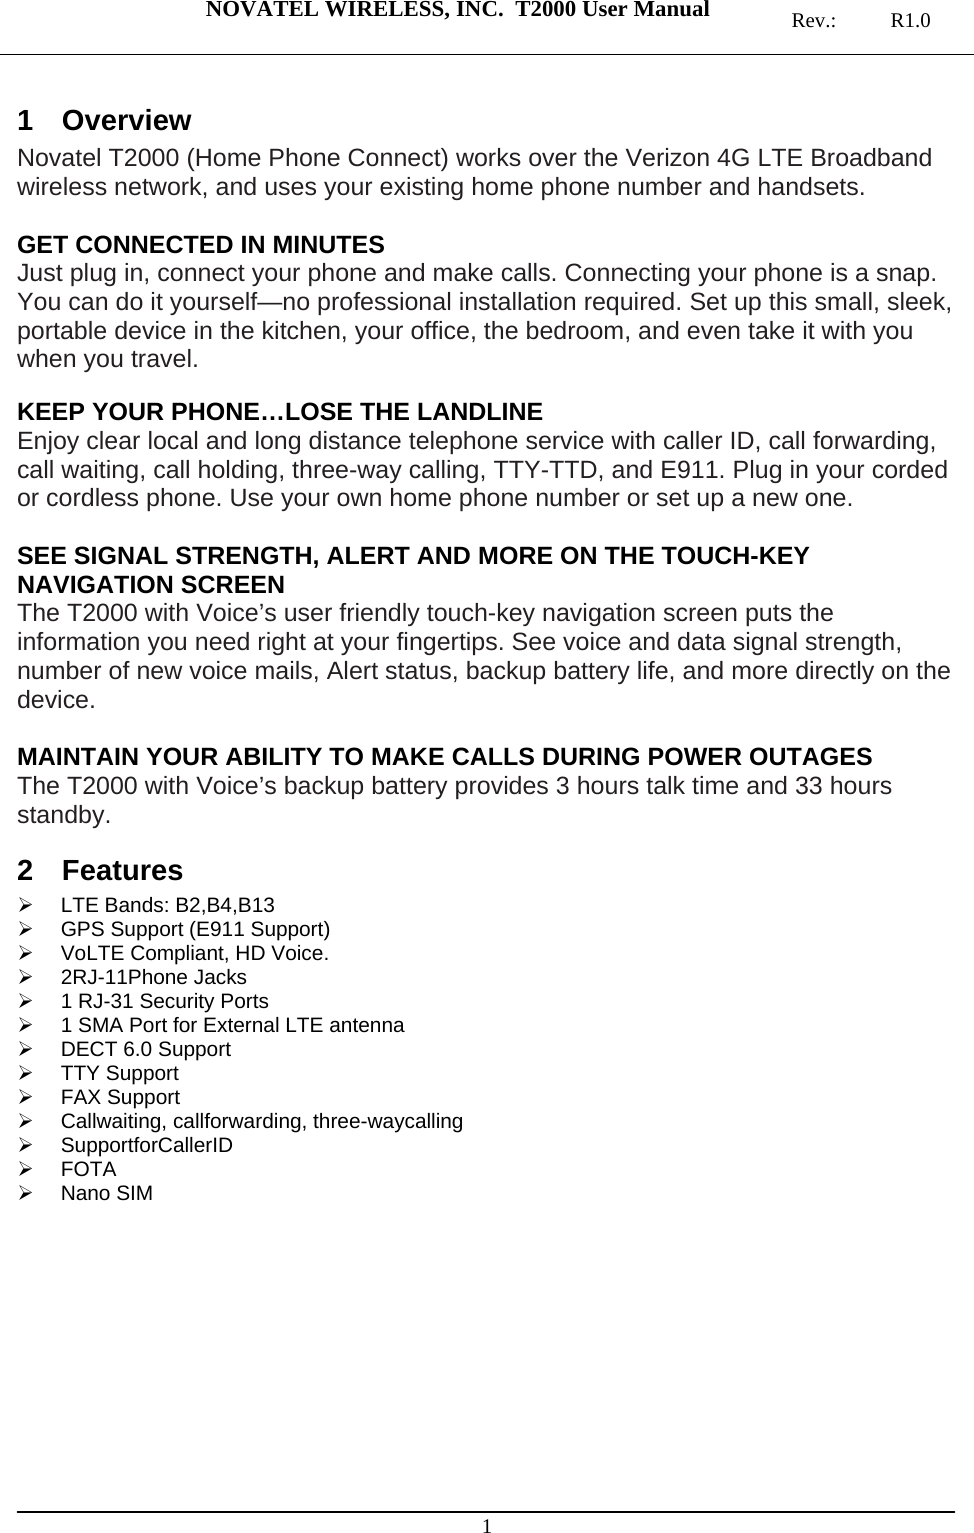  NOVATEL WIRELESS, INC.  T2000 User Manual   Rev.: R1.0  1 1 Overview Novatel T2000 (Home Phone Connect) works over the Verizon 4G LTE Broadband wireless network, and uses your existing home phone number and handsets.   GET CONNECTED IN MINUTES Just plug in, connect your phone and make calls. Connecting your phone is a snap. You can do it yourself—no professional installation required. Set up this small, sleek, portable device in the kitchen, your office, the bedroom, and even take it with you when you travel.  KEEP YOUR PHONE…LOSE THE LANDLINE Enjoy clear local and long distance telephone service with caller ID, call forwarding, call waiting, call holding, three-way calling, TTY-TTD, and E911. Plug in your corded or cordless phone. Use your own home phone number or set up a new one.  SEE SIGNAL STRENGTH, ALERT AND MORE ON THE TOUCH-KEY NAVIGATION SCREEN The T2000 with Voice’s user friendly touch-key navigation screen puts the information you need right at your fingertips. See voice and data signal strength, number of new voice mails, Alert status, backup battery life, and more directly on the device.  MAINTAIN YOUR ABILITY TO MAKE CALLS DURING POWER OUTAGES The T2000 with Voice’s backup battery provides 3 hours talk time and 33 hours standby. 2 Features  LTE Bands: B2,B4,B13   GPS Support (E911 Support)   VoLTE Compliant, HD Voice.  2RJ-11Phone Jacks   1 RJ-31 Security Ports   1 SMA Port for External LTE antenna   DECT 6.0 Support  TTY Support  FAX Support   Callwaiting, callforwarding, three-waycalling  SupportforCallerID  FOTA  Nano SIM   